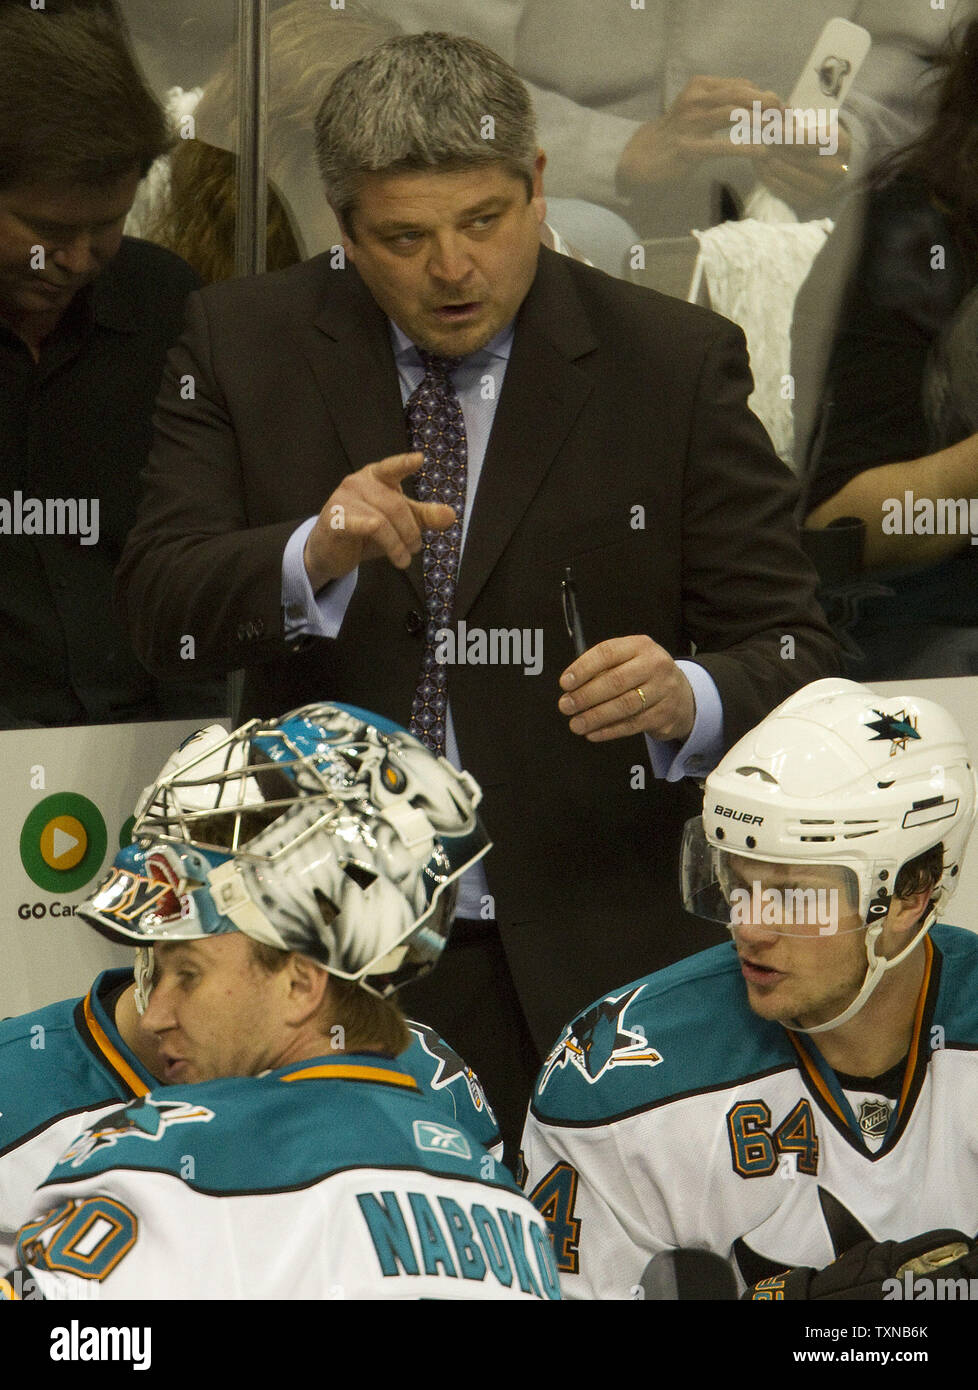 San Jose Sharks head coach Todd McLellan (top) instructs during a time out against the Colorado Avalanche in game six of the NHL quarterfinal playoffs at the Pepsi Center on April 24, 2010 in Denver.  Sharks goalie Nabokov stands in the foreground.   San Jose leads Colorado 3-2 in the series.       UPI/Gary C. Caskey Stock Photo